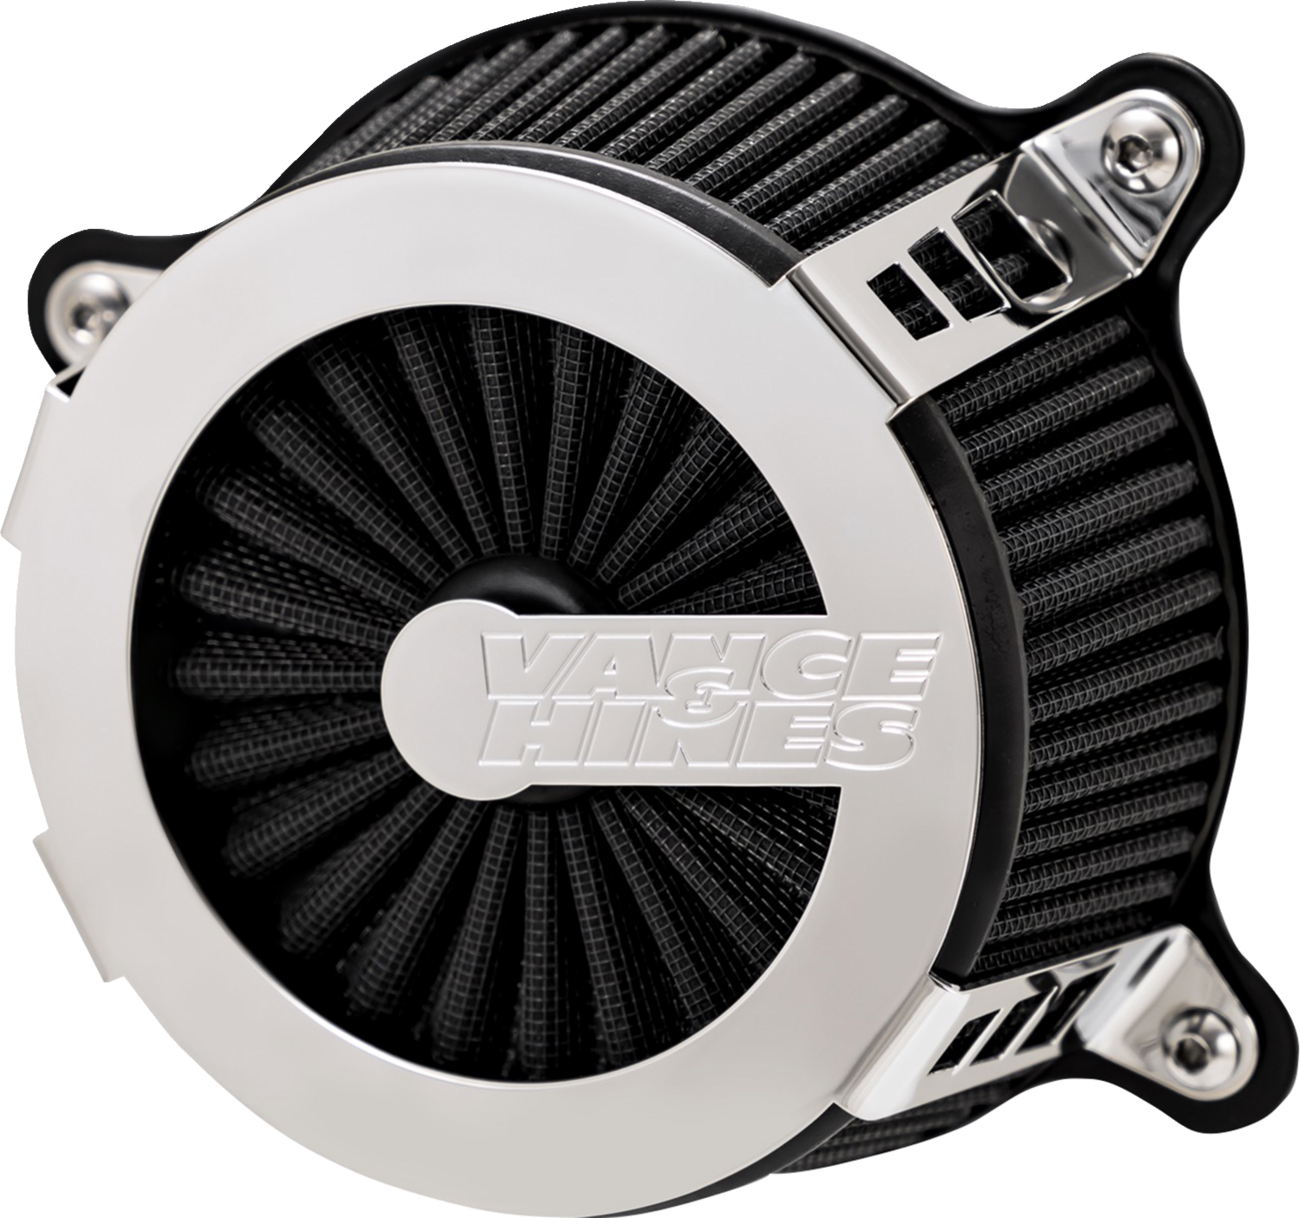 VANCE & HINES Cage Fighter Air Cleaner - Chrome 70355